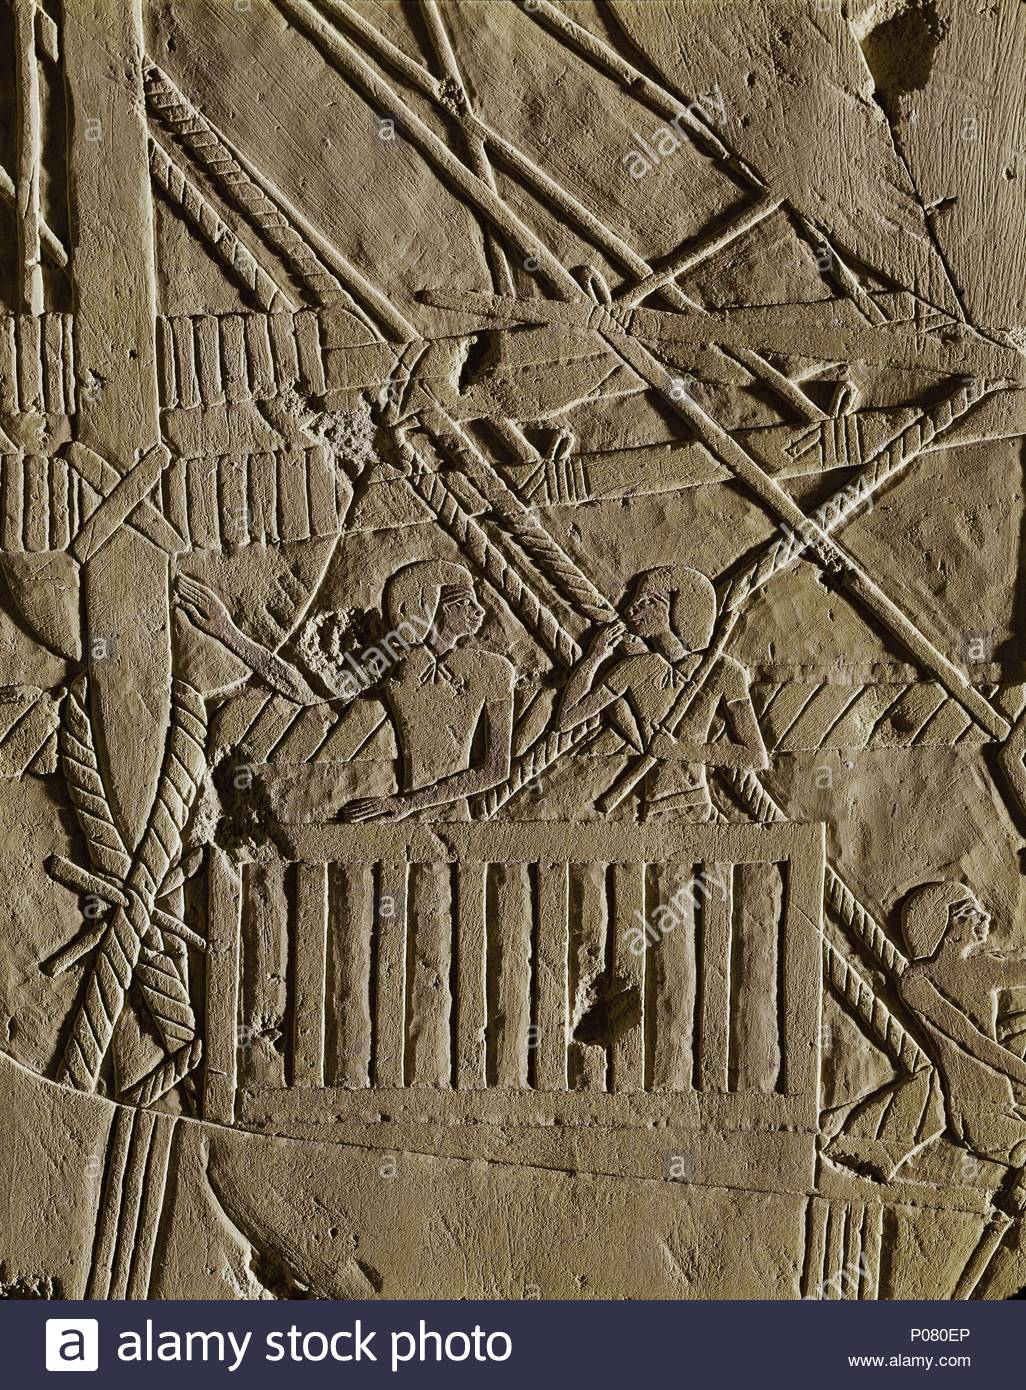 hatshepsut expedition to punt